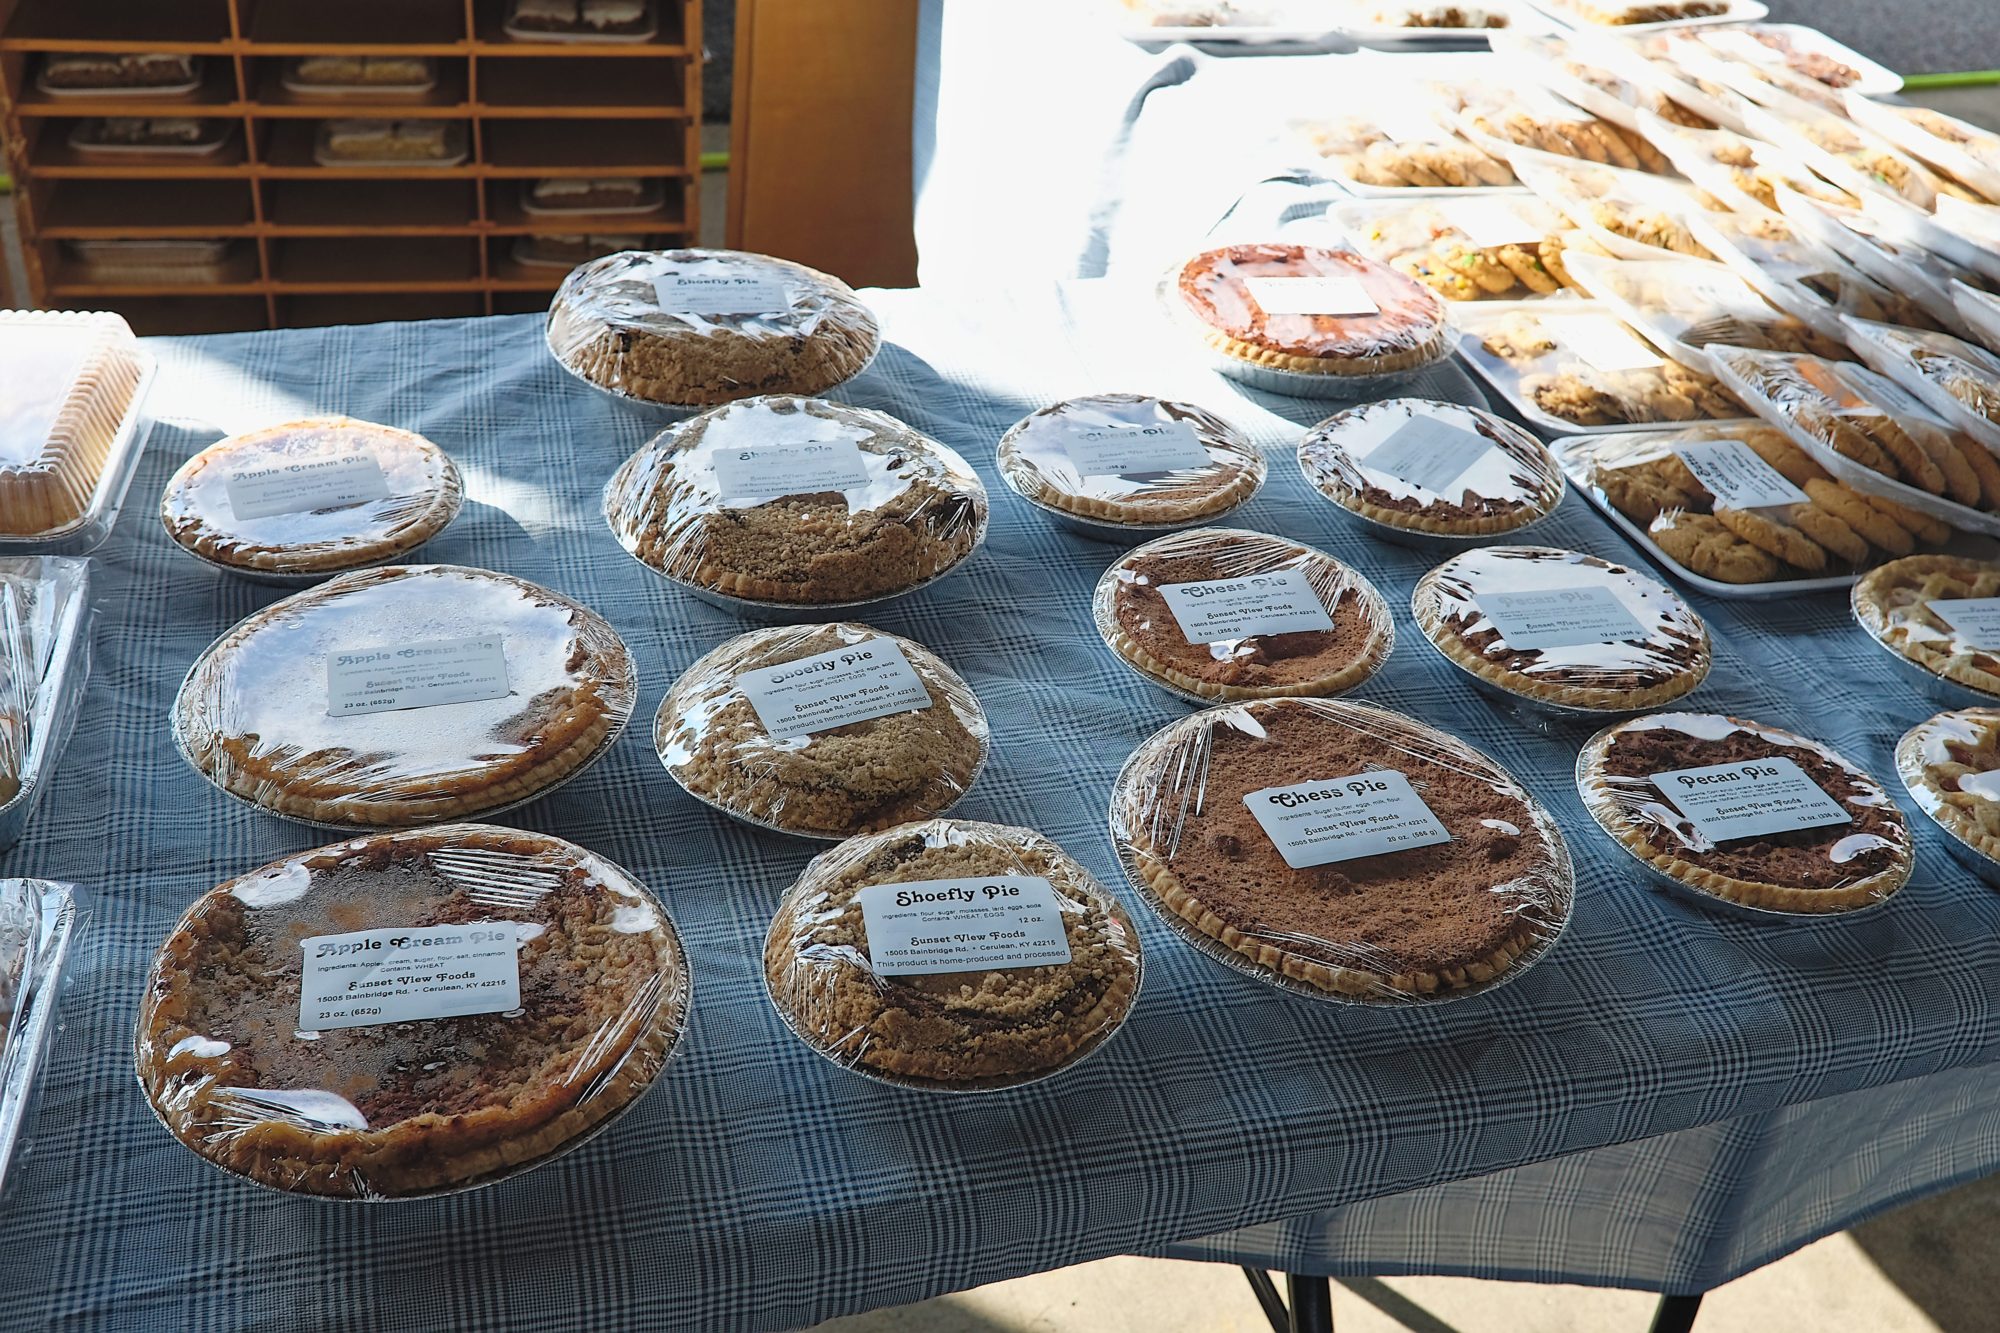 Pies for sale at the farmers market